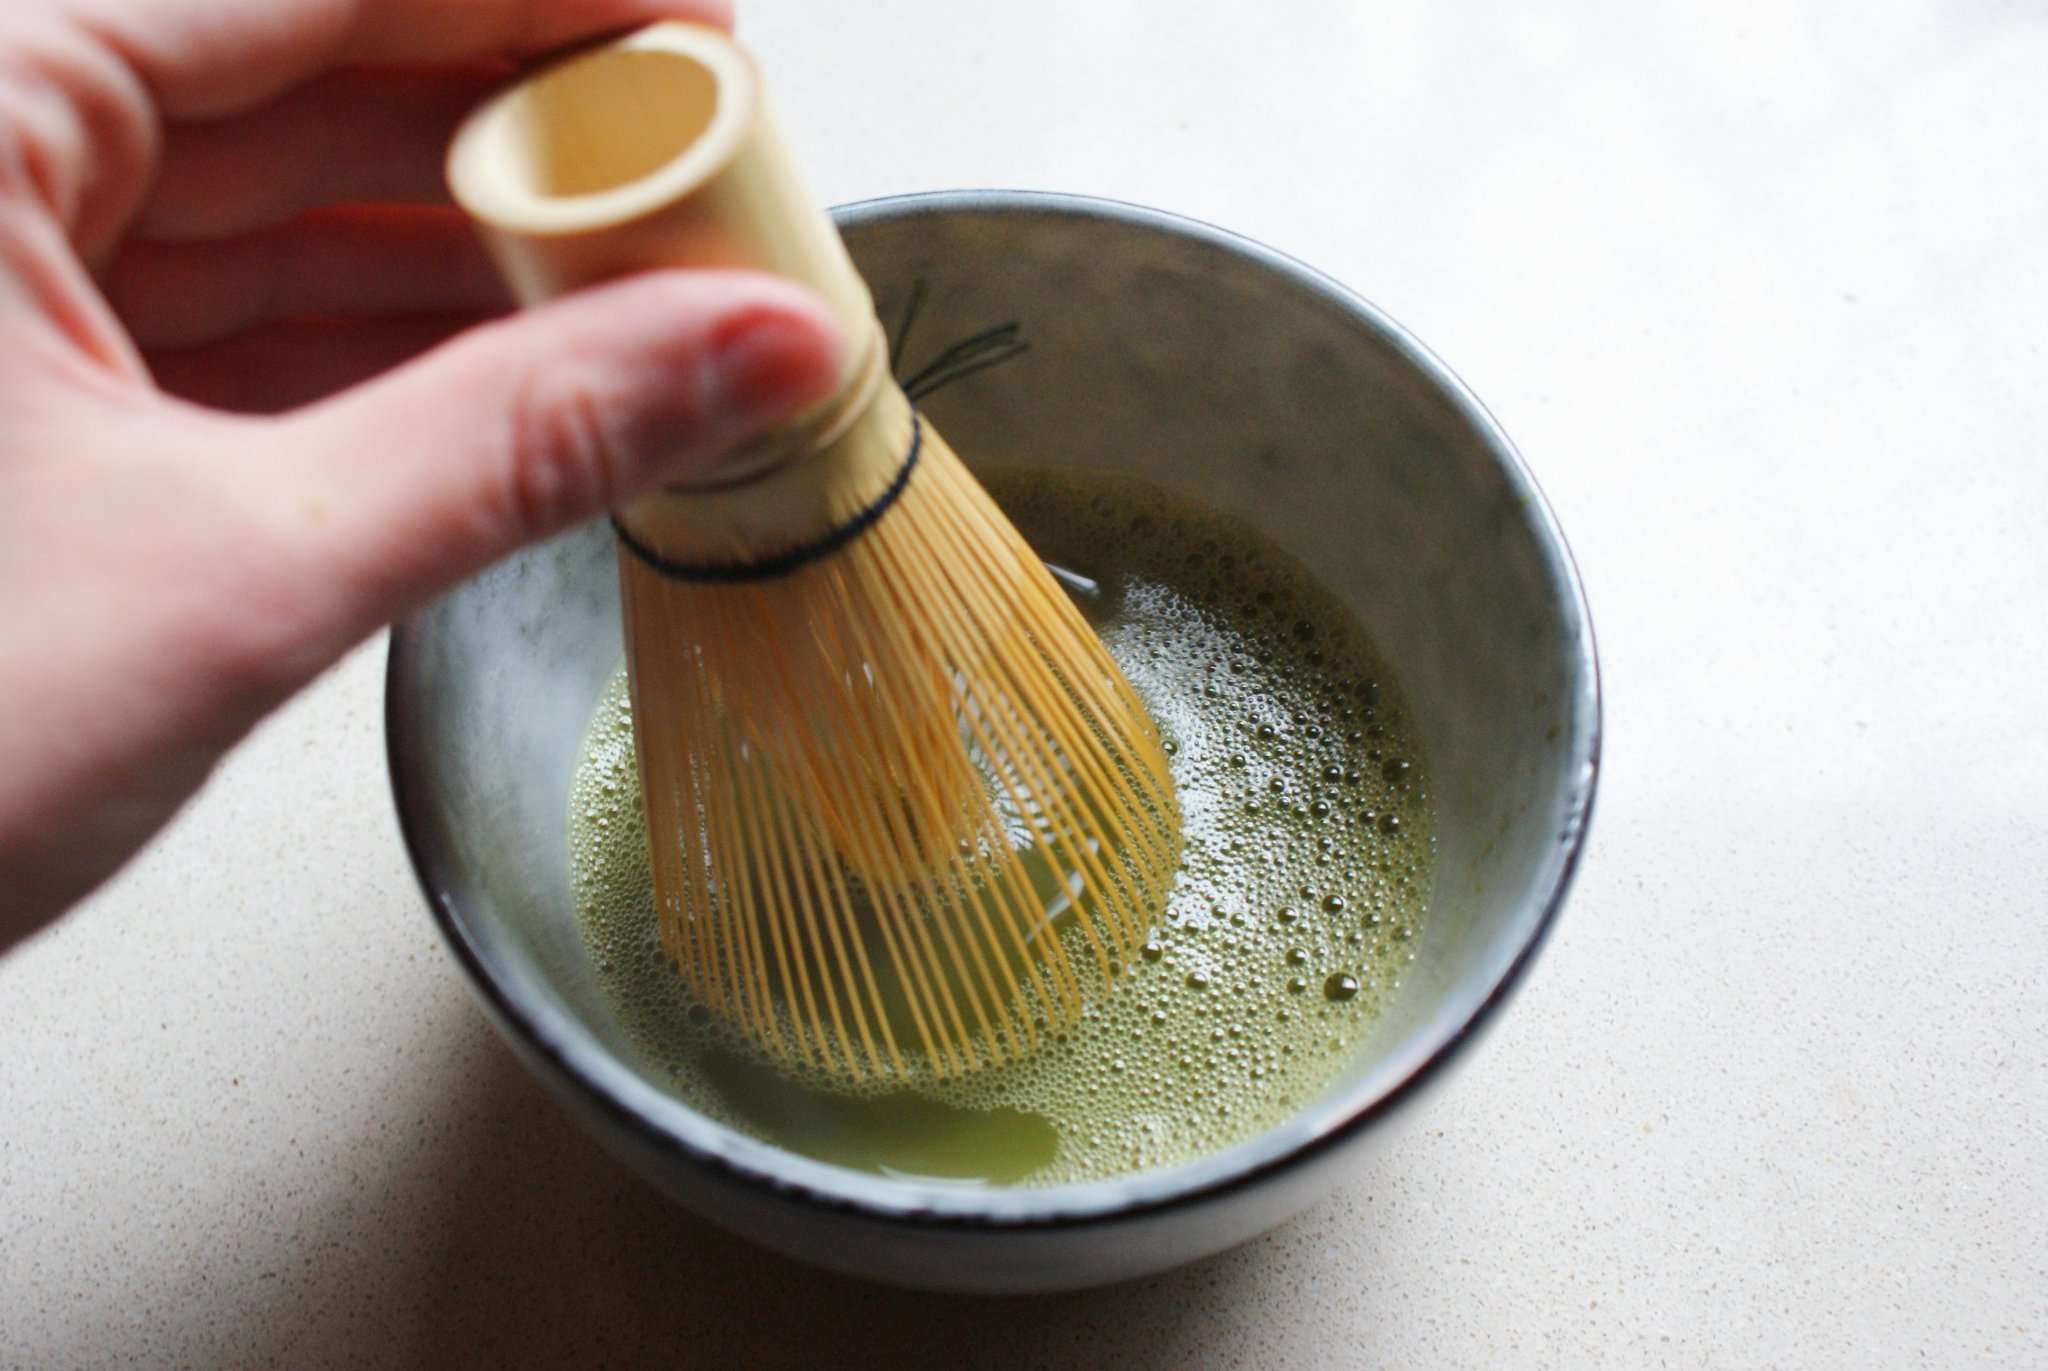 HOW TO: MAKE MATCHA (JAPANESE GREEN TEA) AT HOME THE TRADITIONAL WAY ...